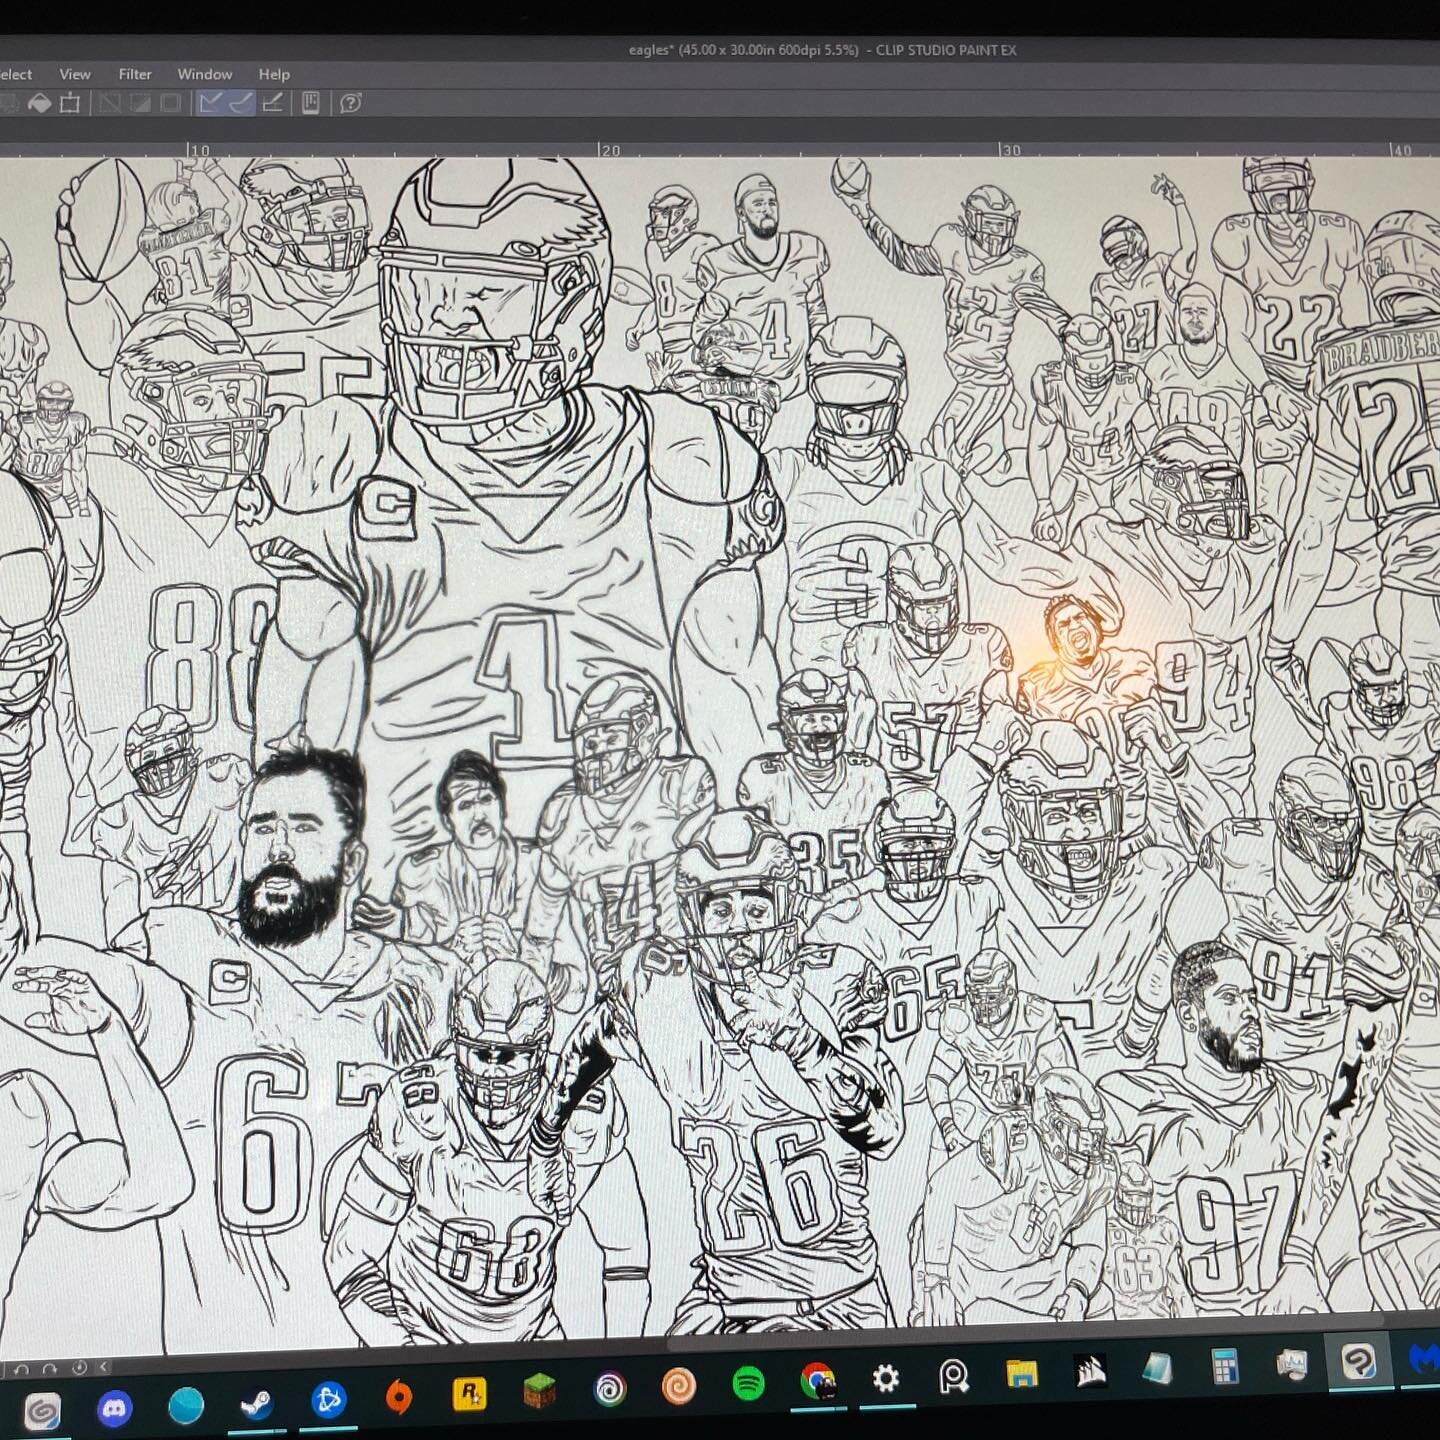 Ink on &lsquo;22 Birds done. Color next. #flyeaglesfly #ink #illustration #wip #eaglesfootball